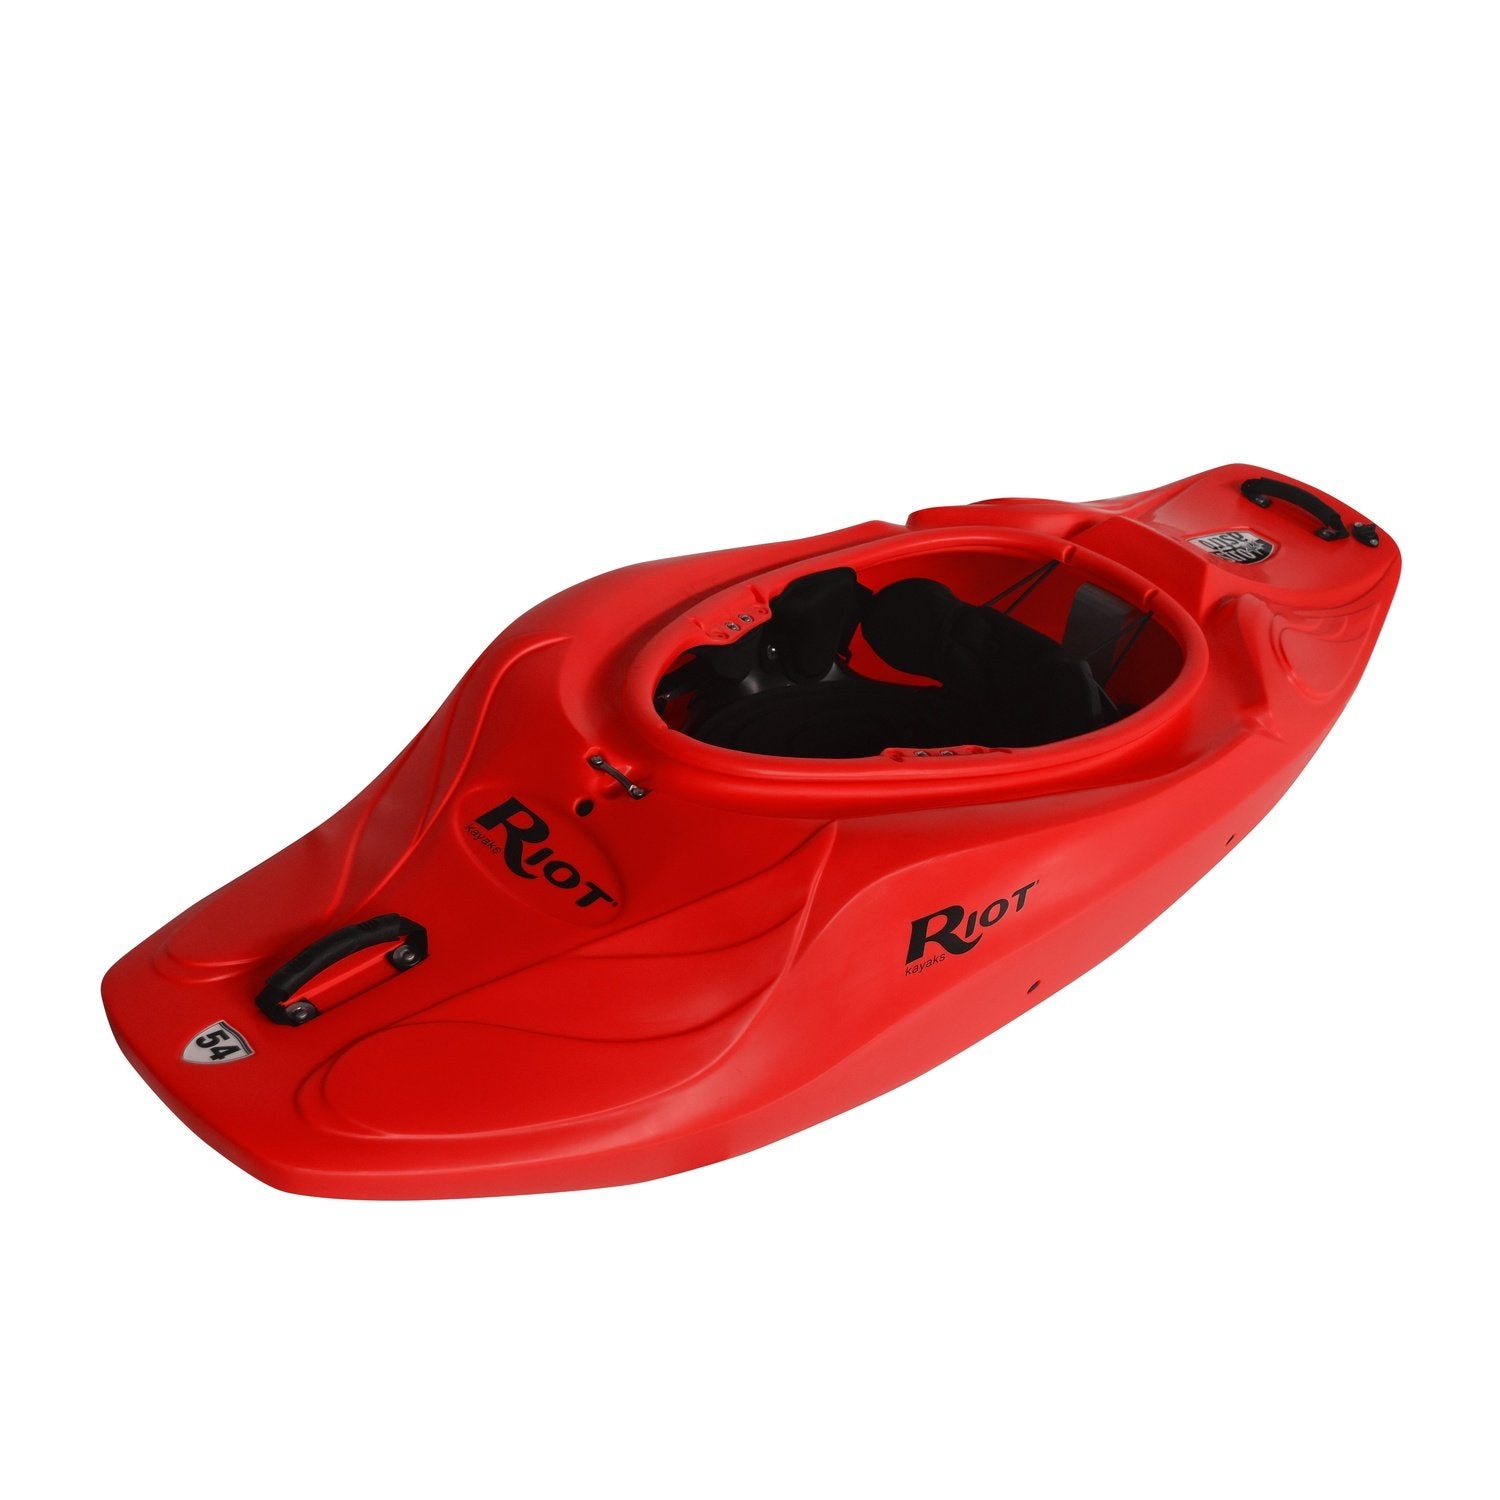 ASTRO 54 Red Kayak Angle View